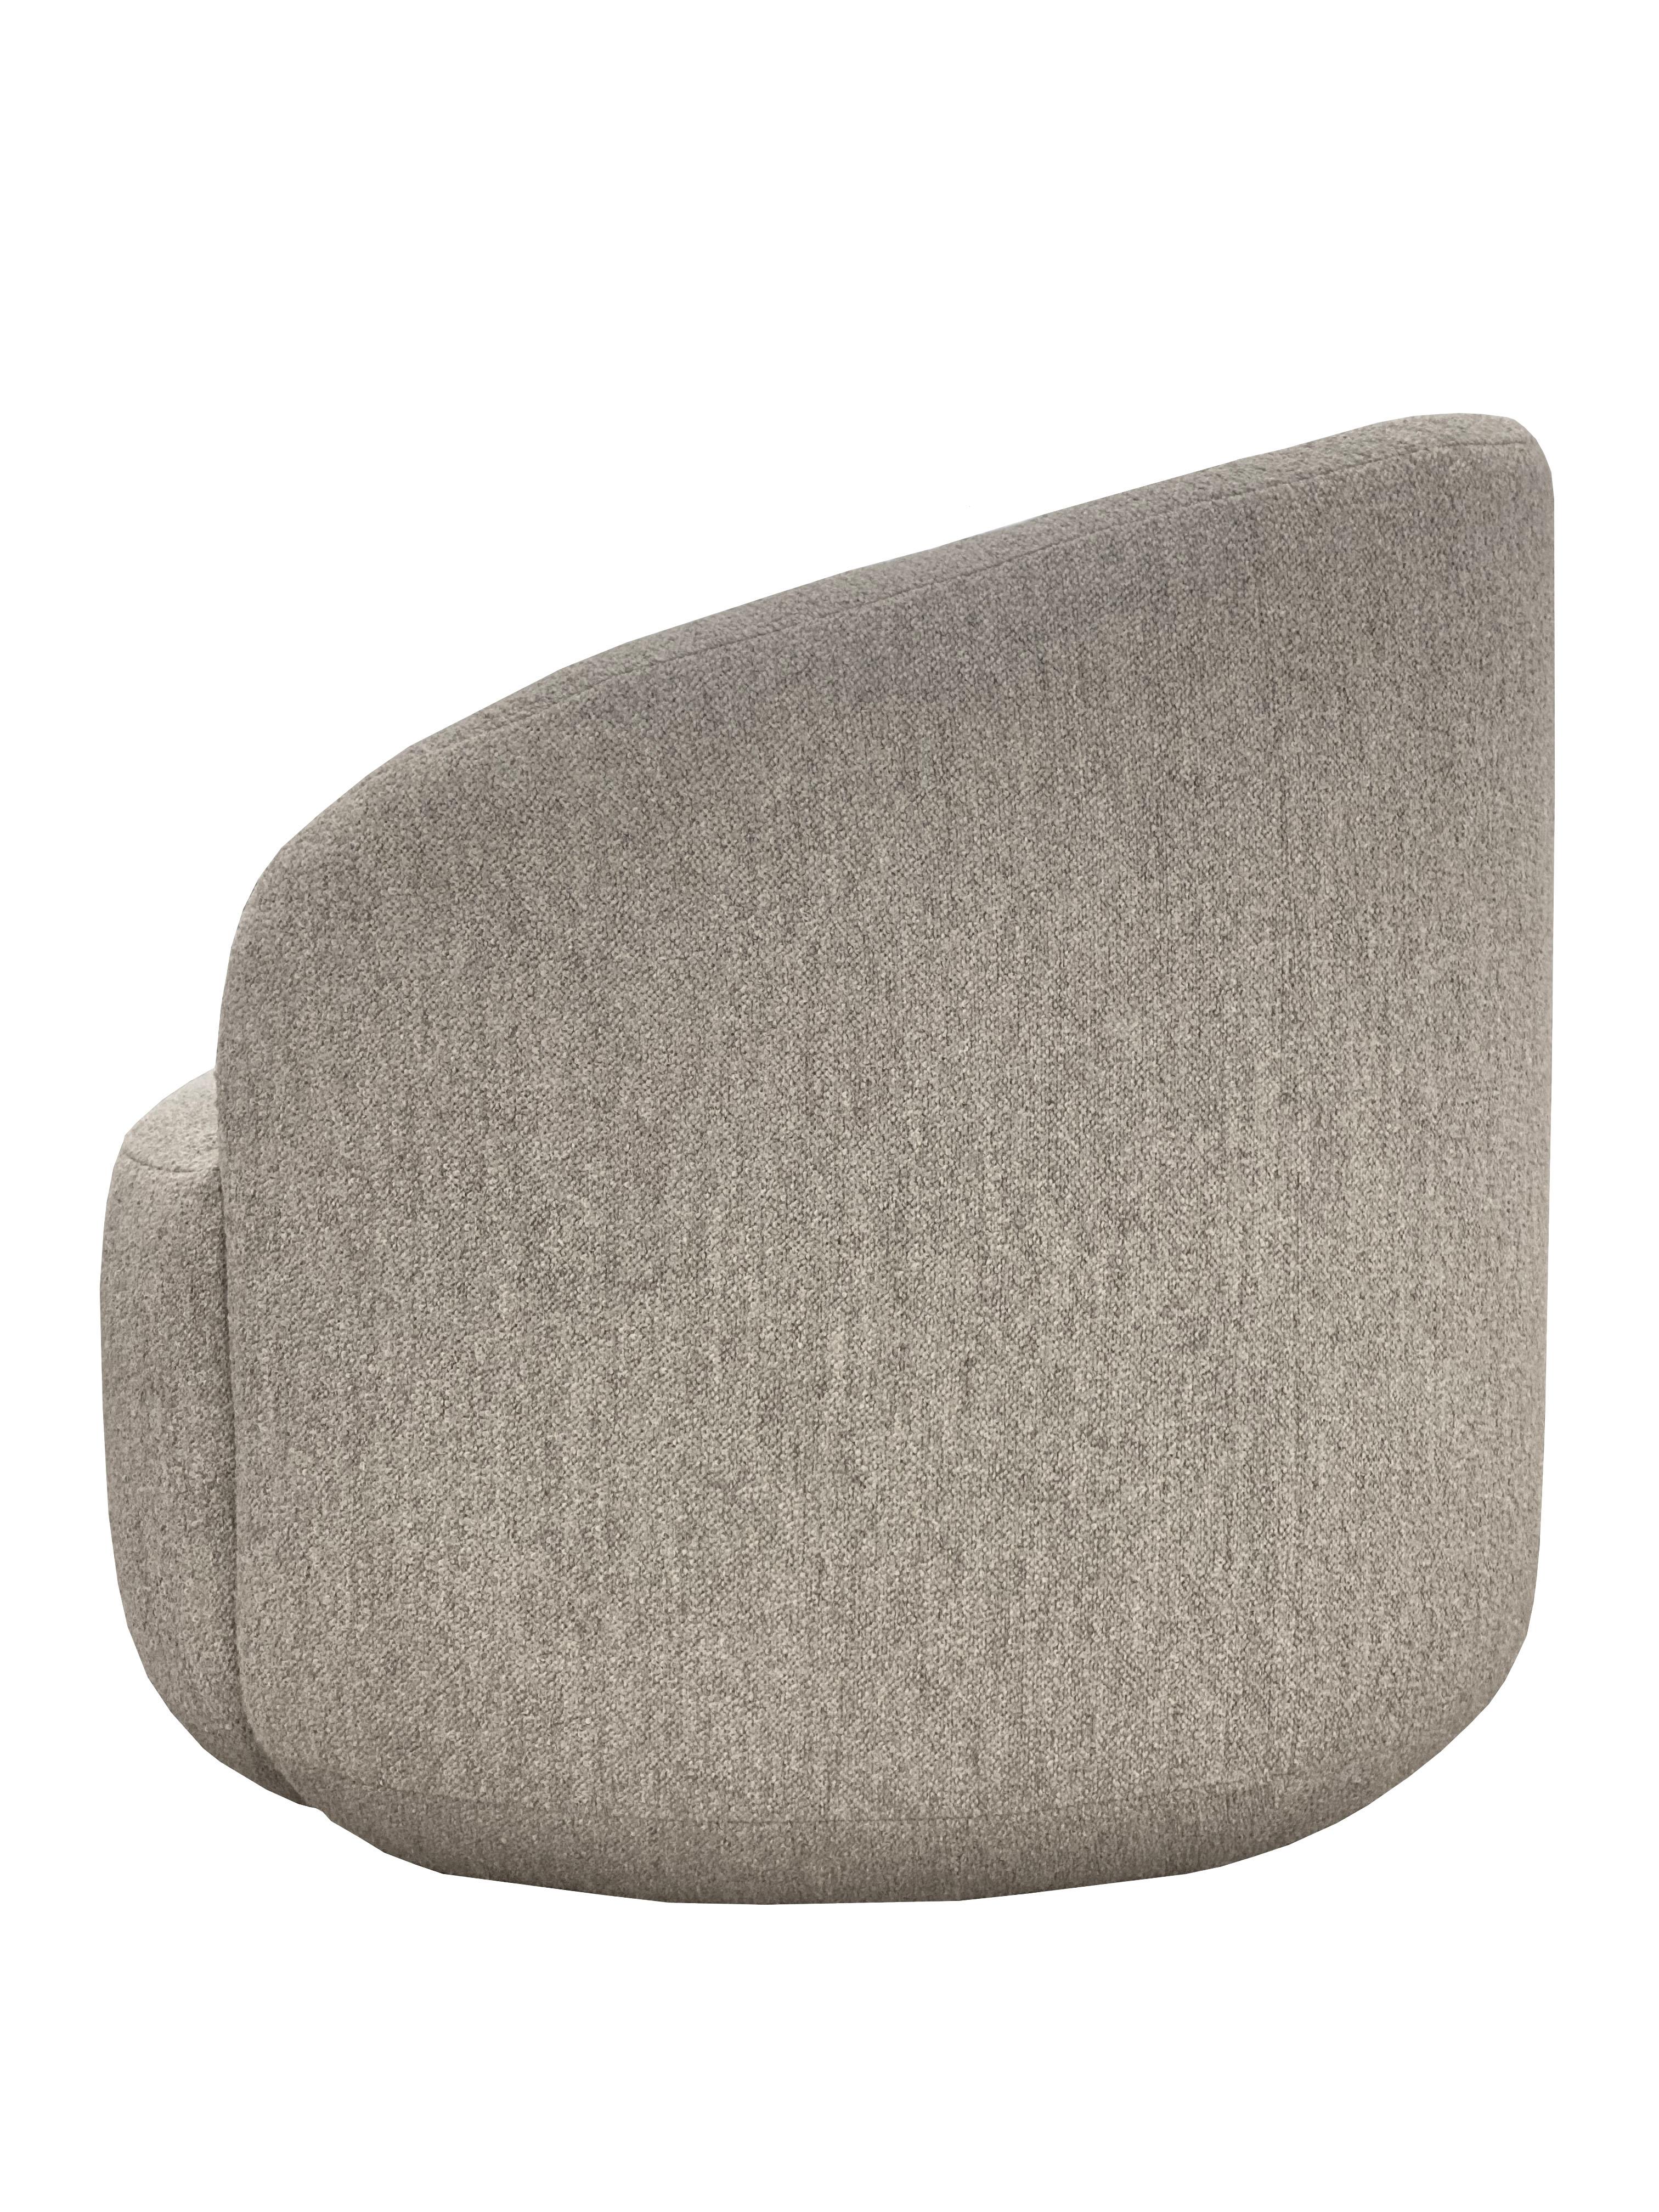 Italian Curved Sofa 'Cottonflower' in Quinoa Fabric by Kabinet For Sale